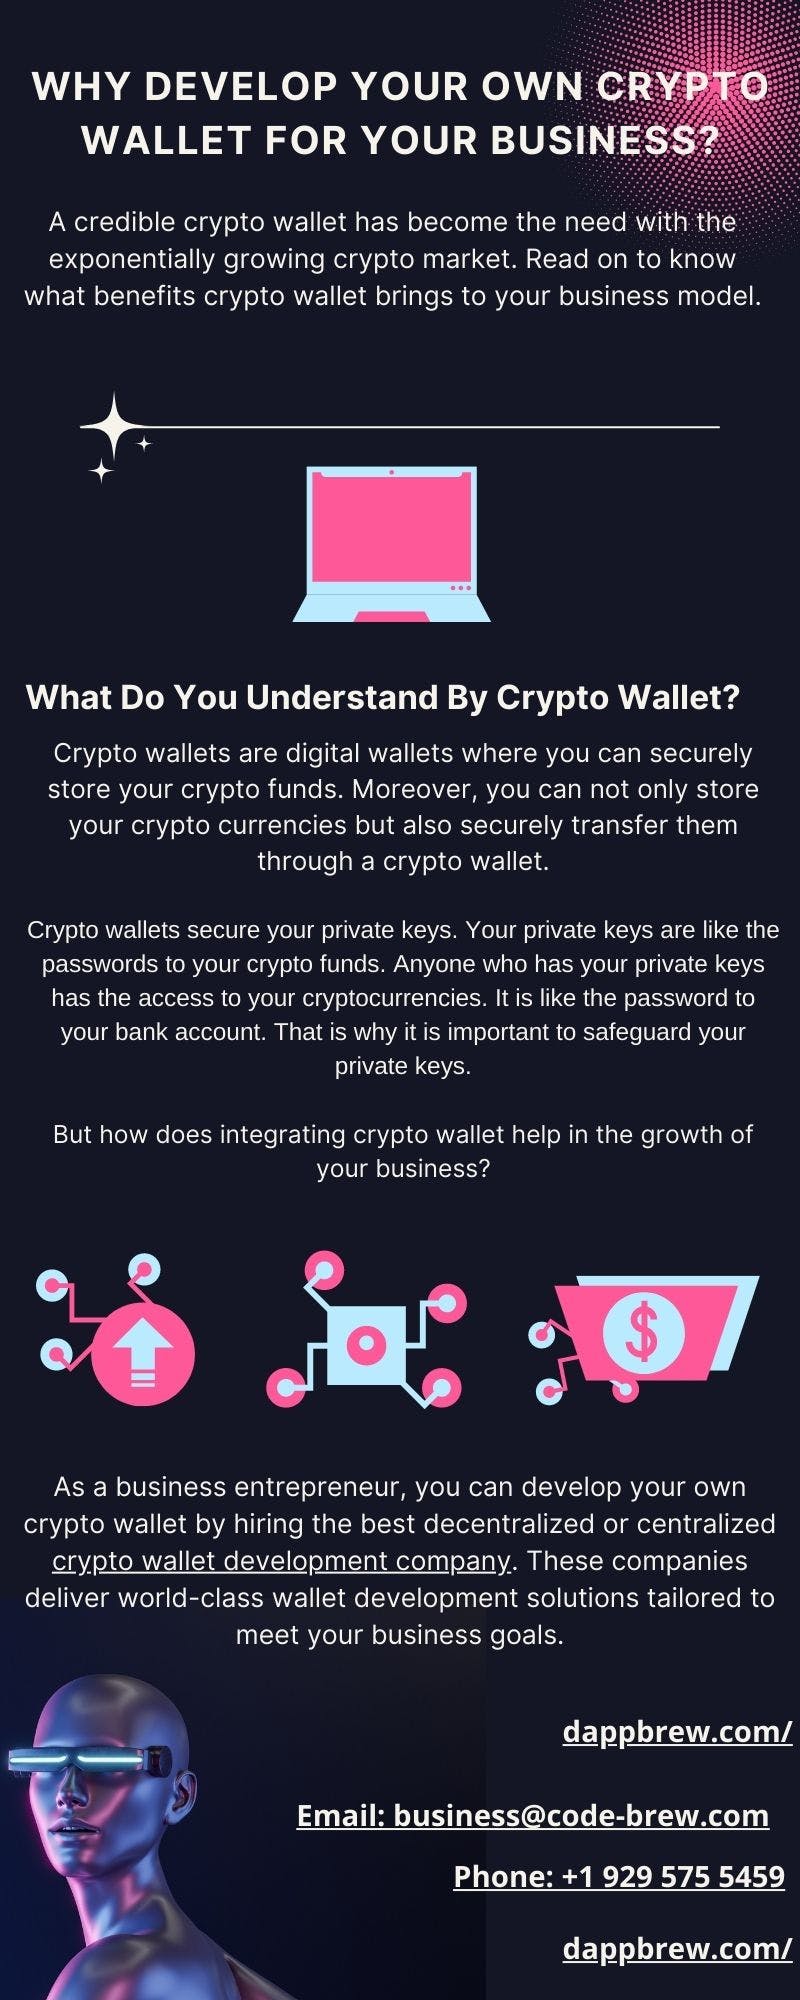 Why Develop Your Own Crypto Wallet For Your Business.jpg